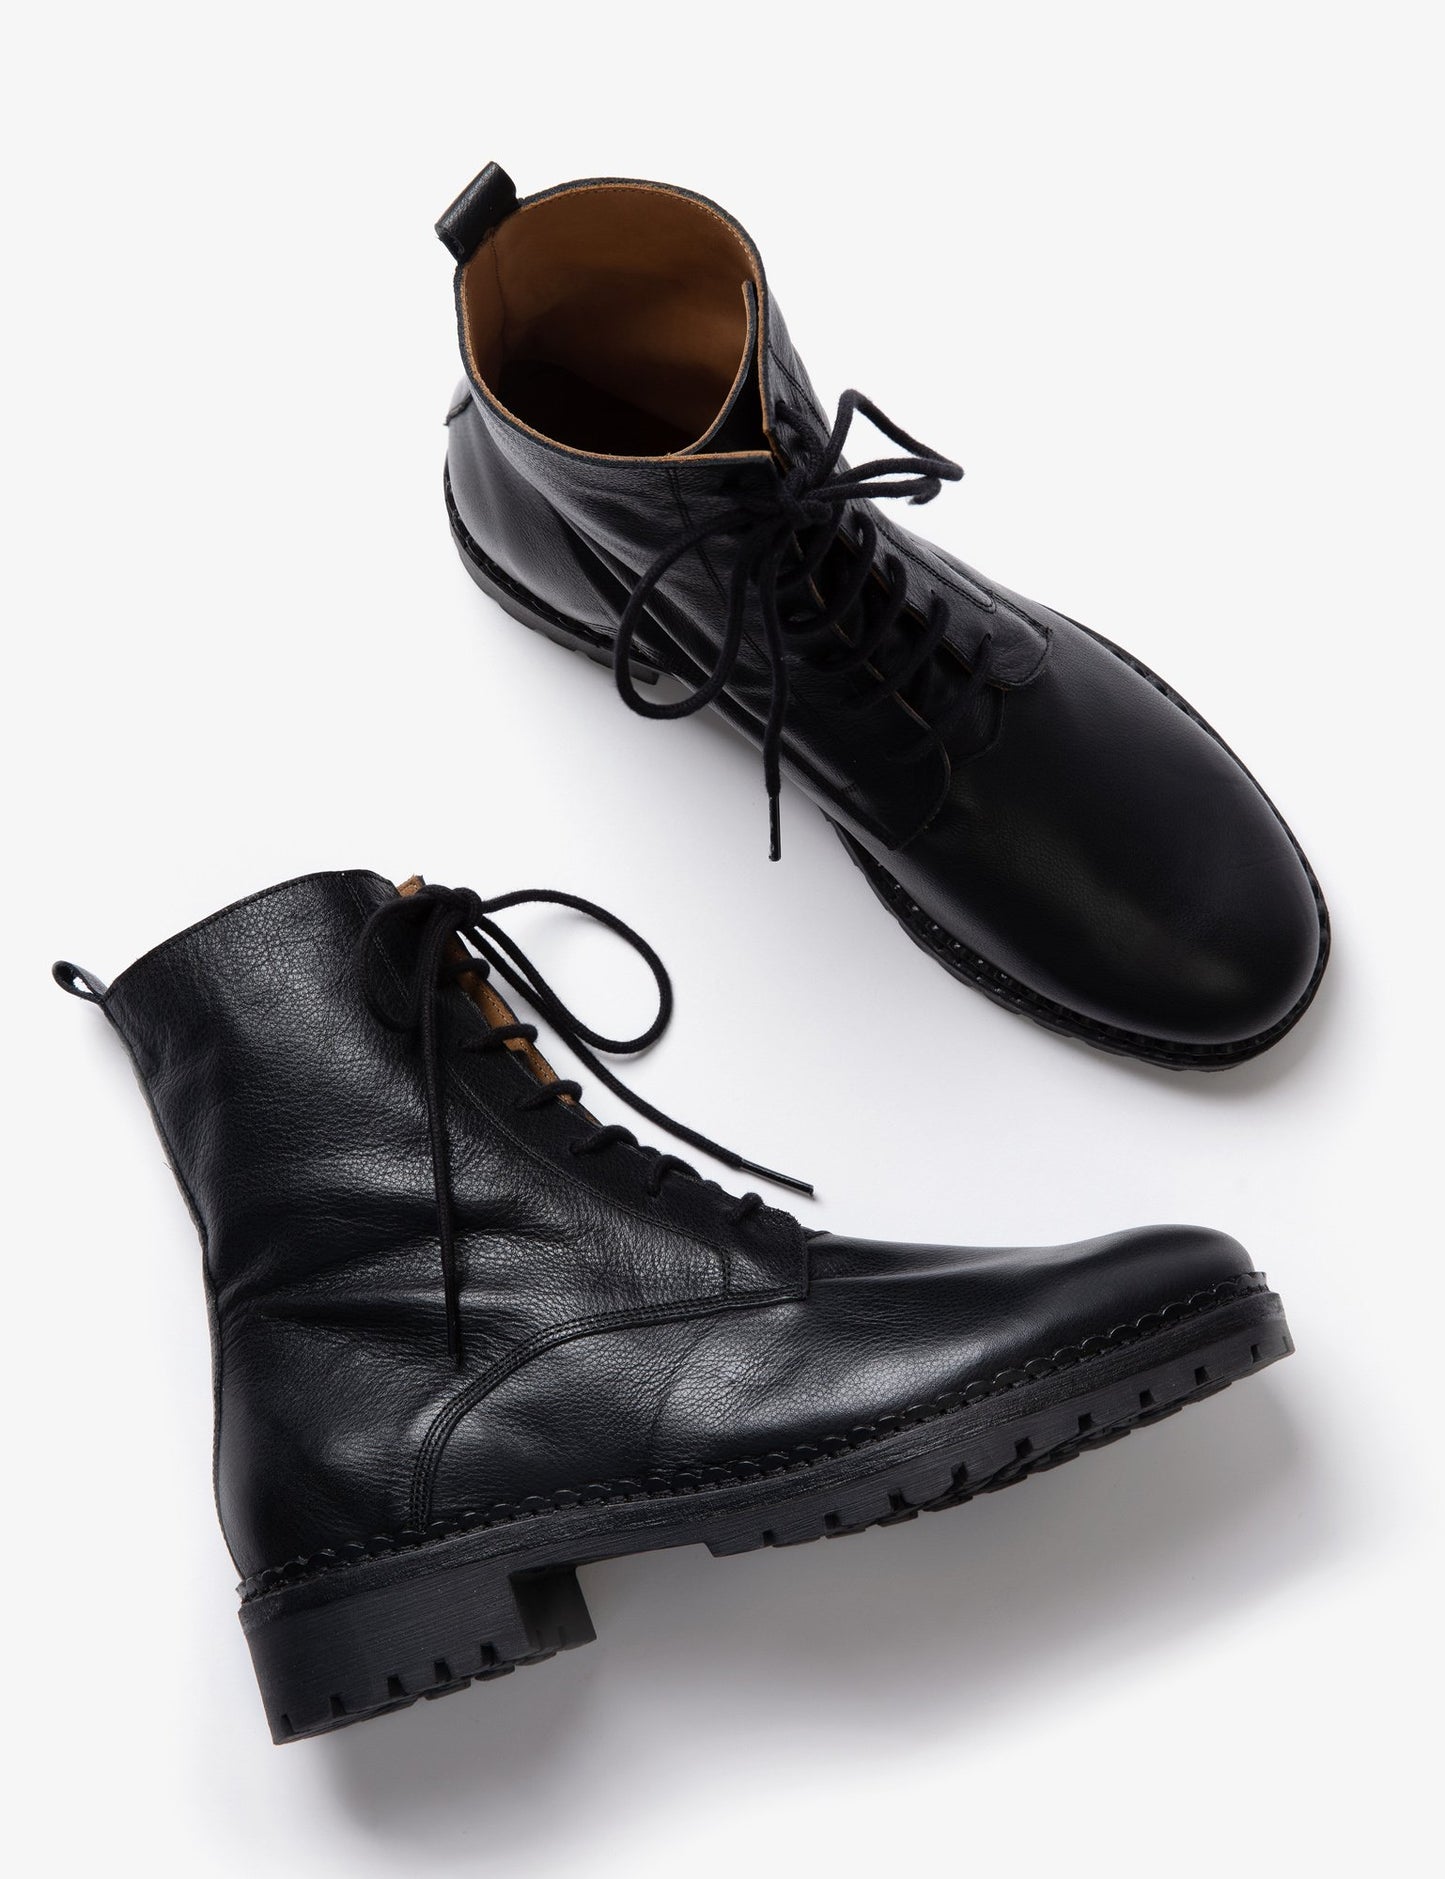 Bartholomew Leather Boot by Penelope Chilvers